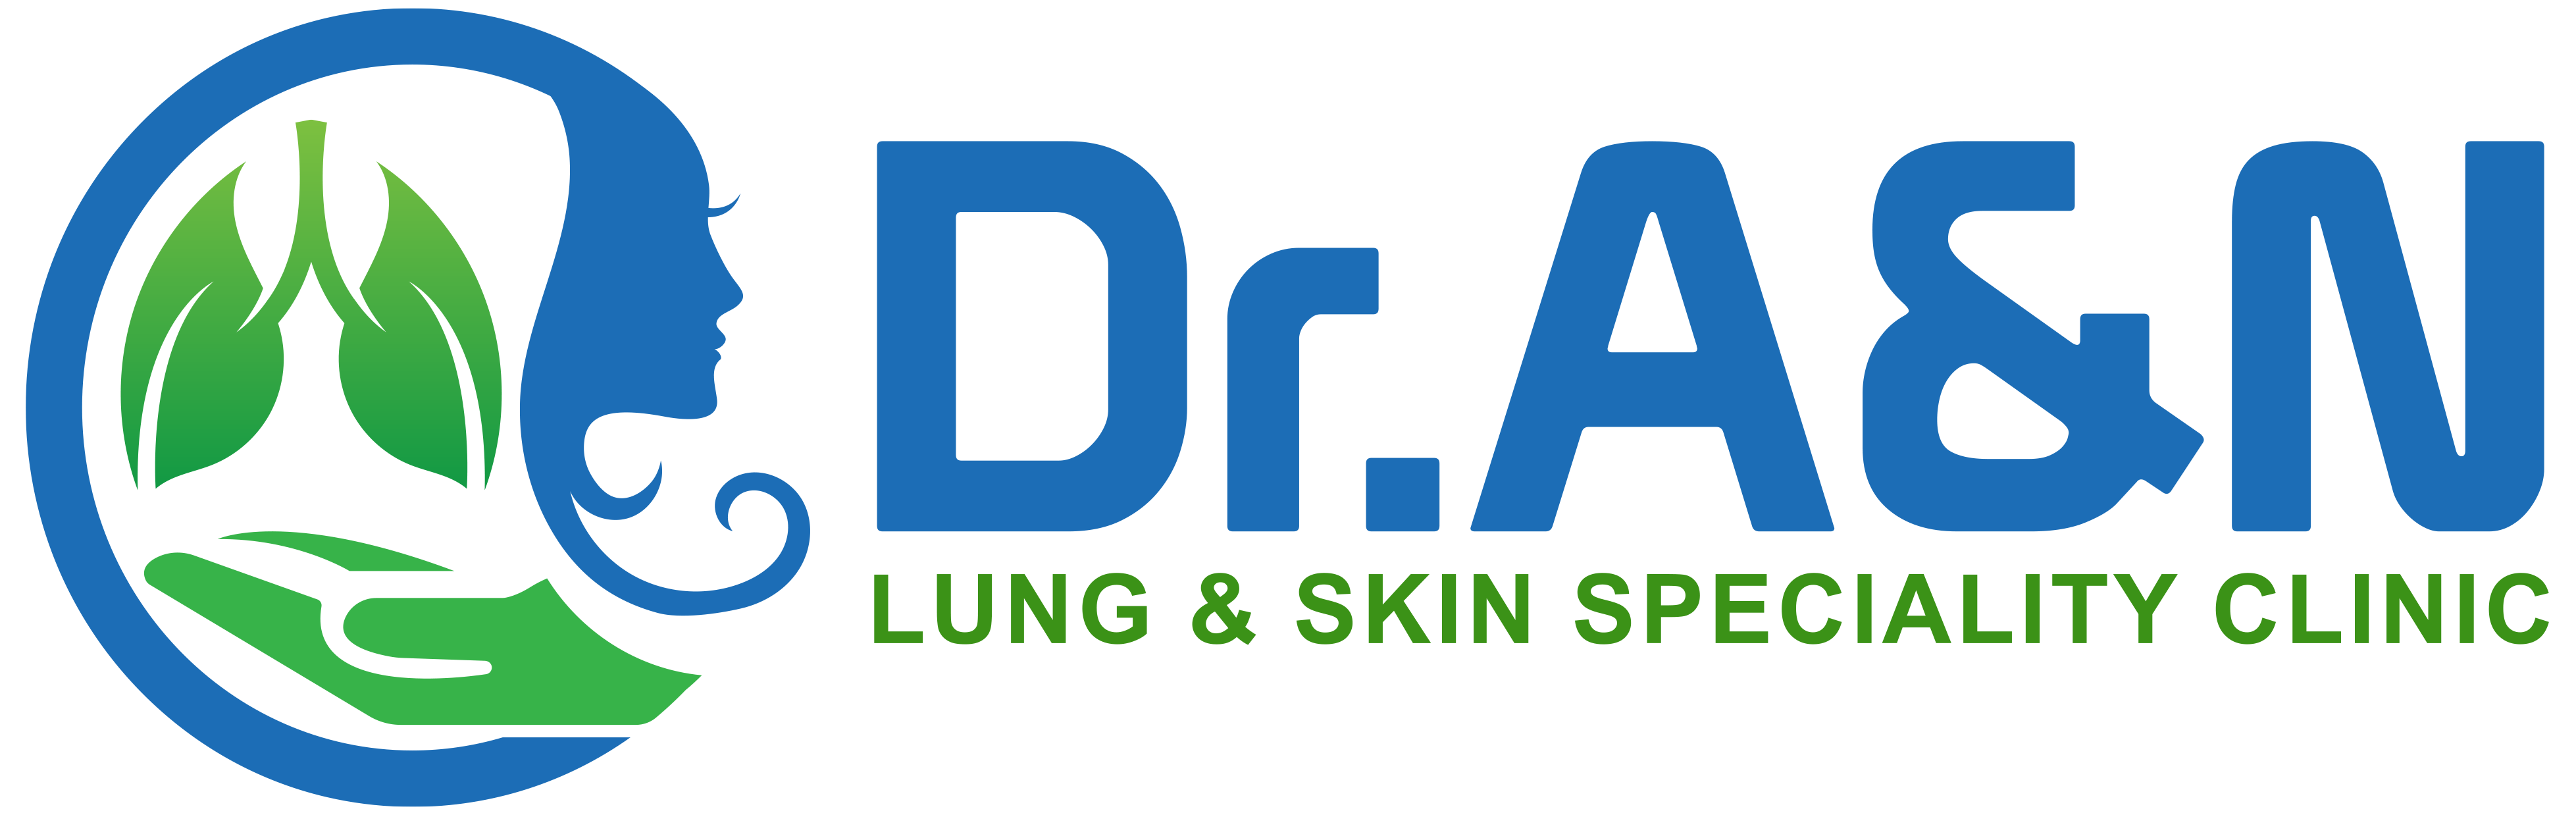 Dr A & N Lung and Skin Speciality Clinic - Hi Tech City - Hyderabad